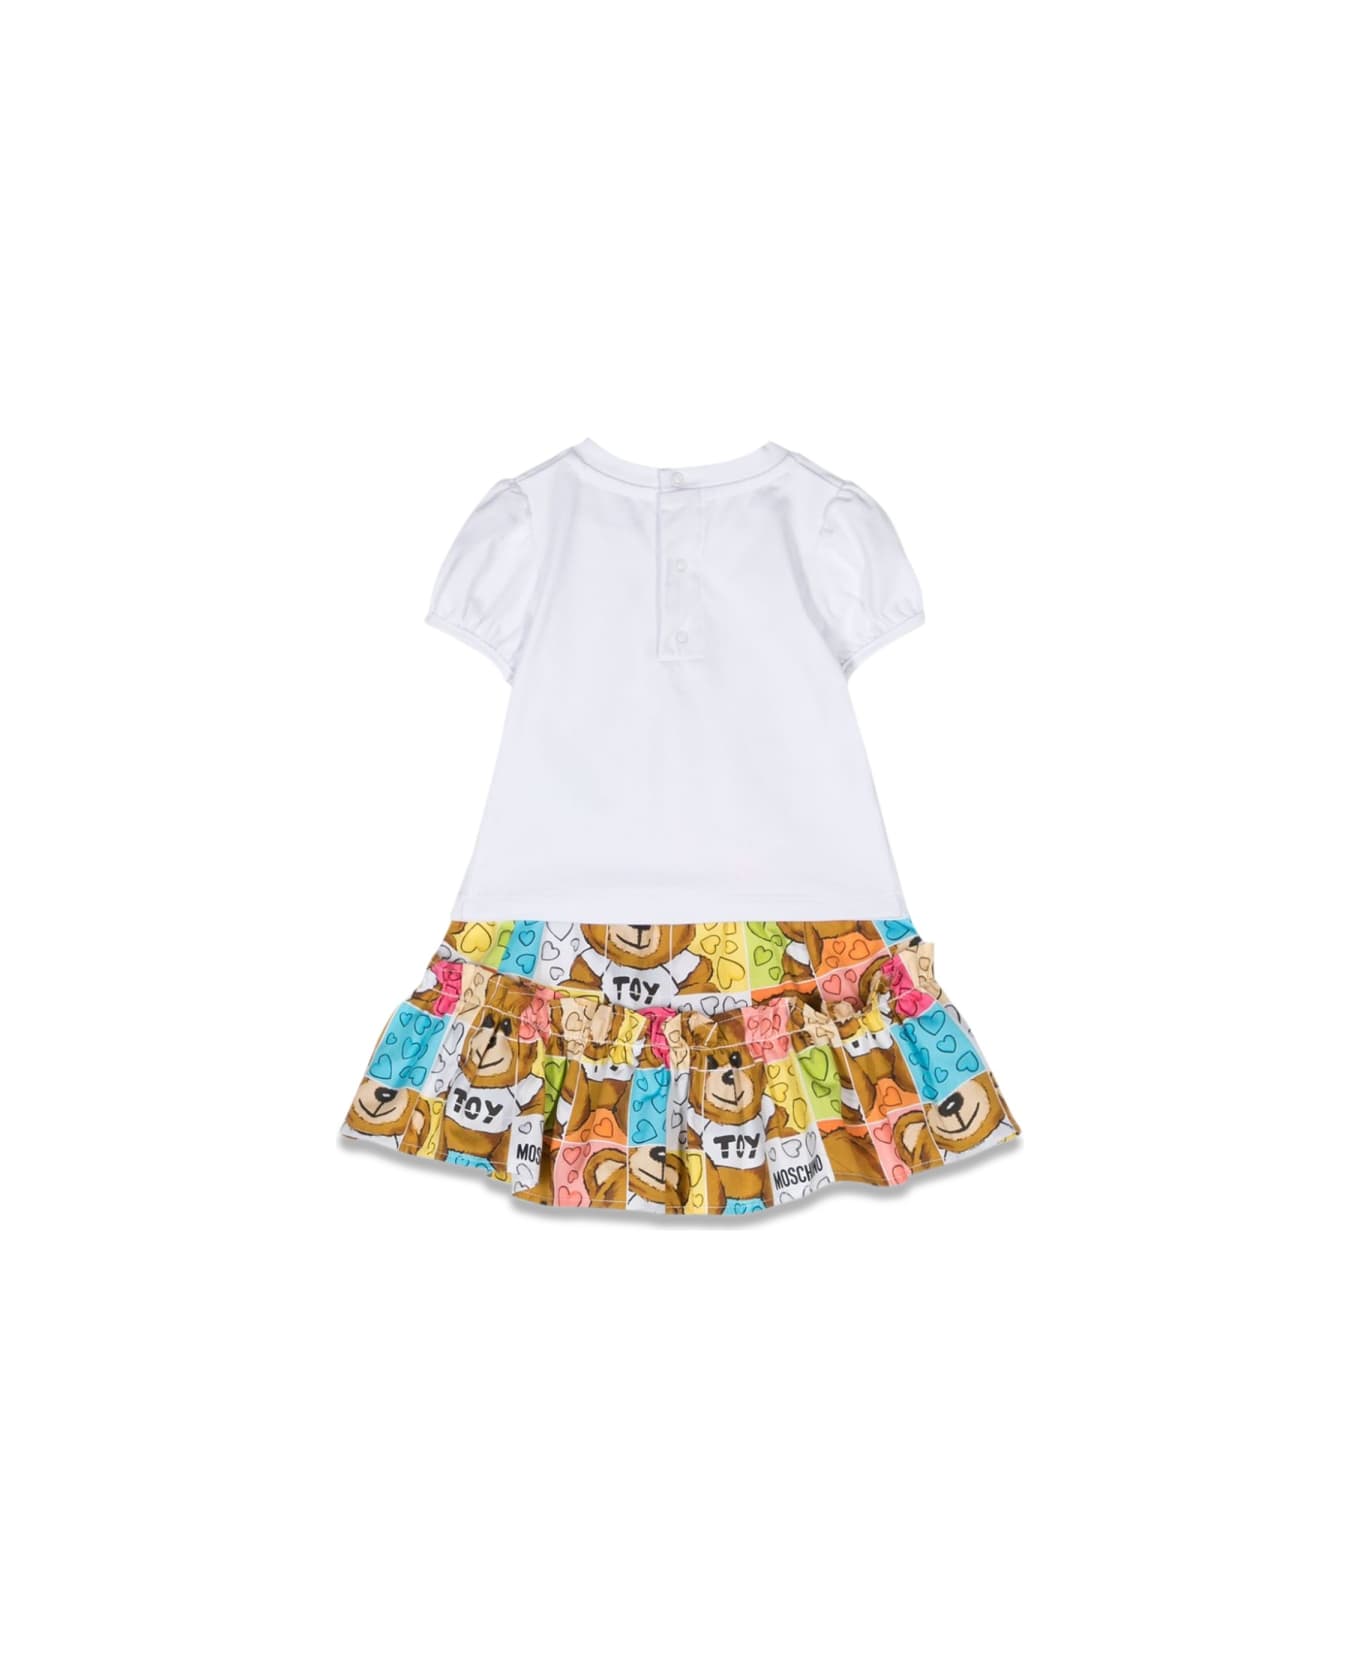 Moschino T-shirt And Skirtset - MULTICOLOUR アクセサリー＆ギフト